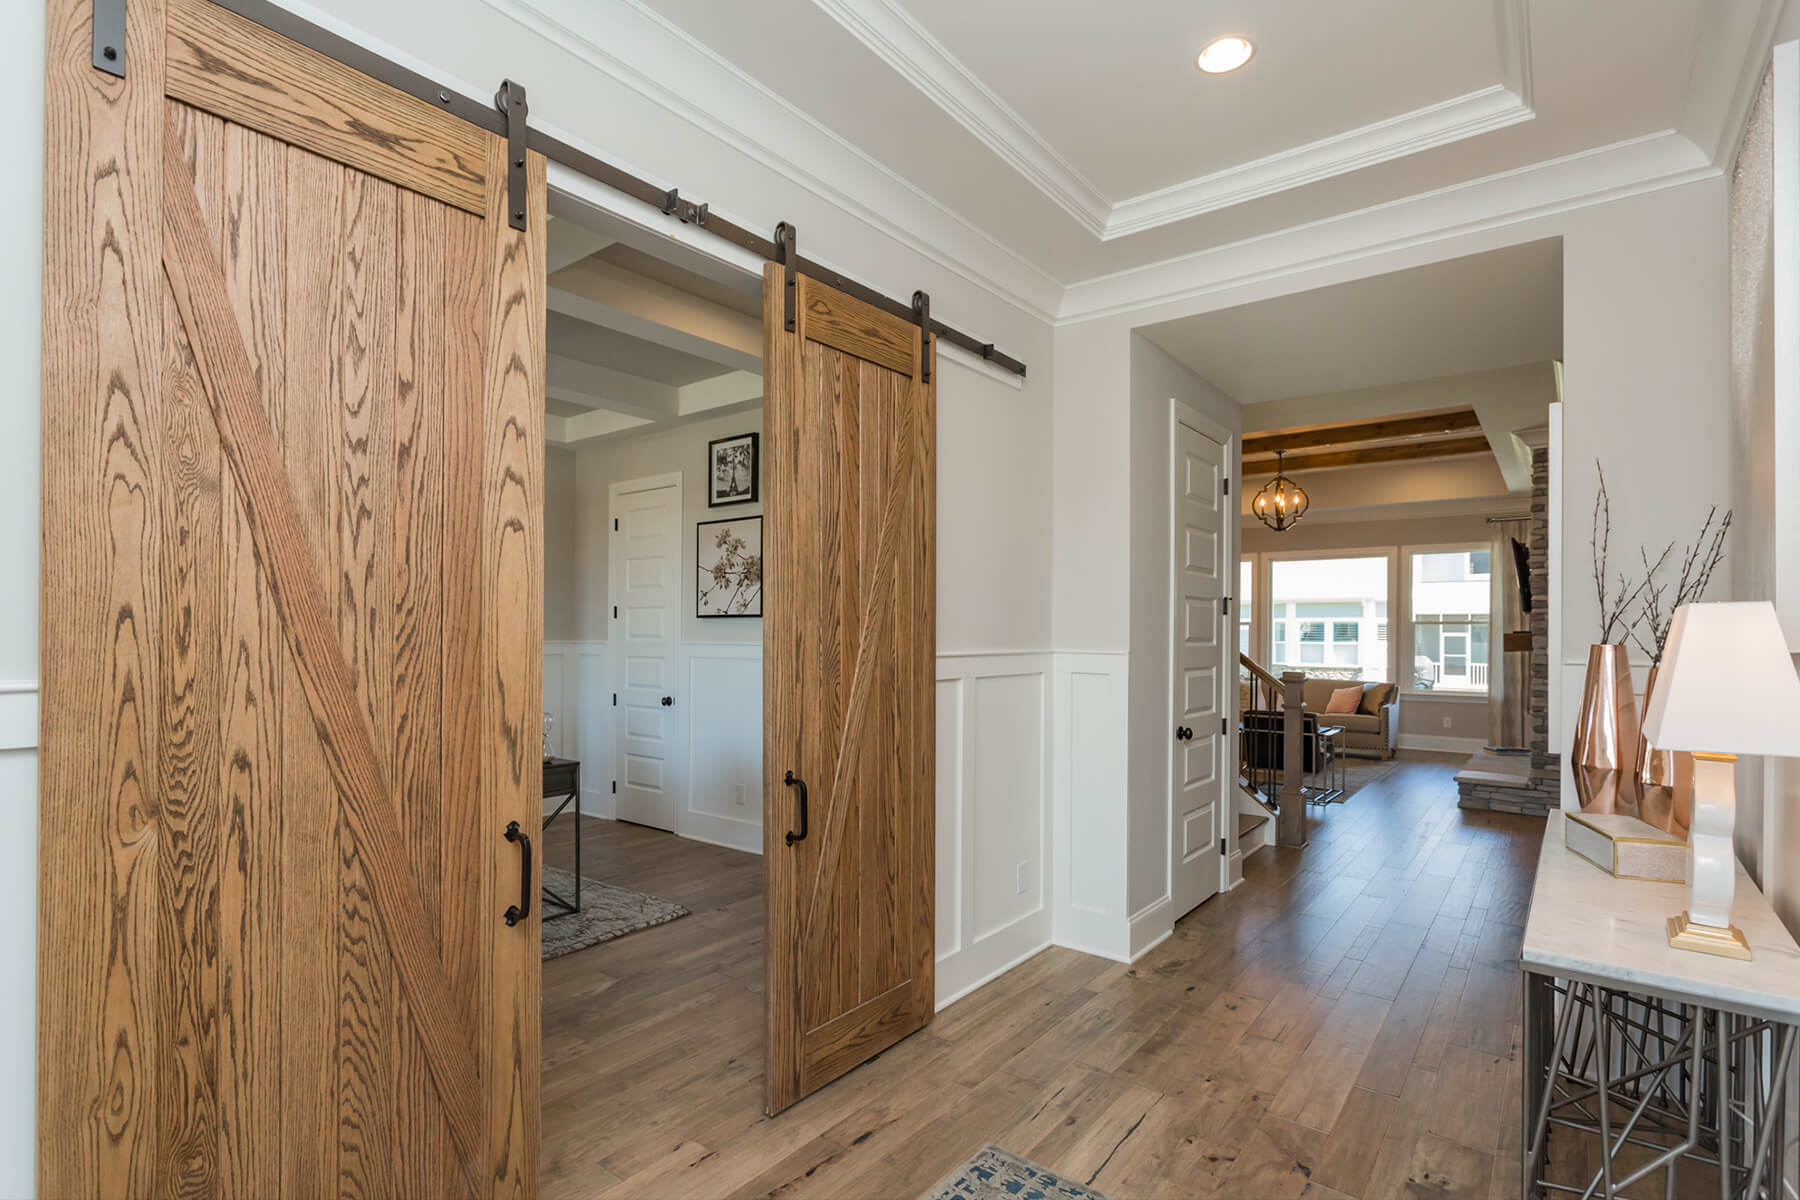 Drees Wood Doors The Rowlandu0027s Striking Exterior Sets The Tone For A Warm Welcome Inside The Foyer Leads You The Open Family Room Dining Area Kitchen And Covered Porch